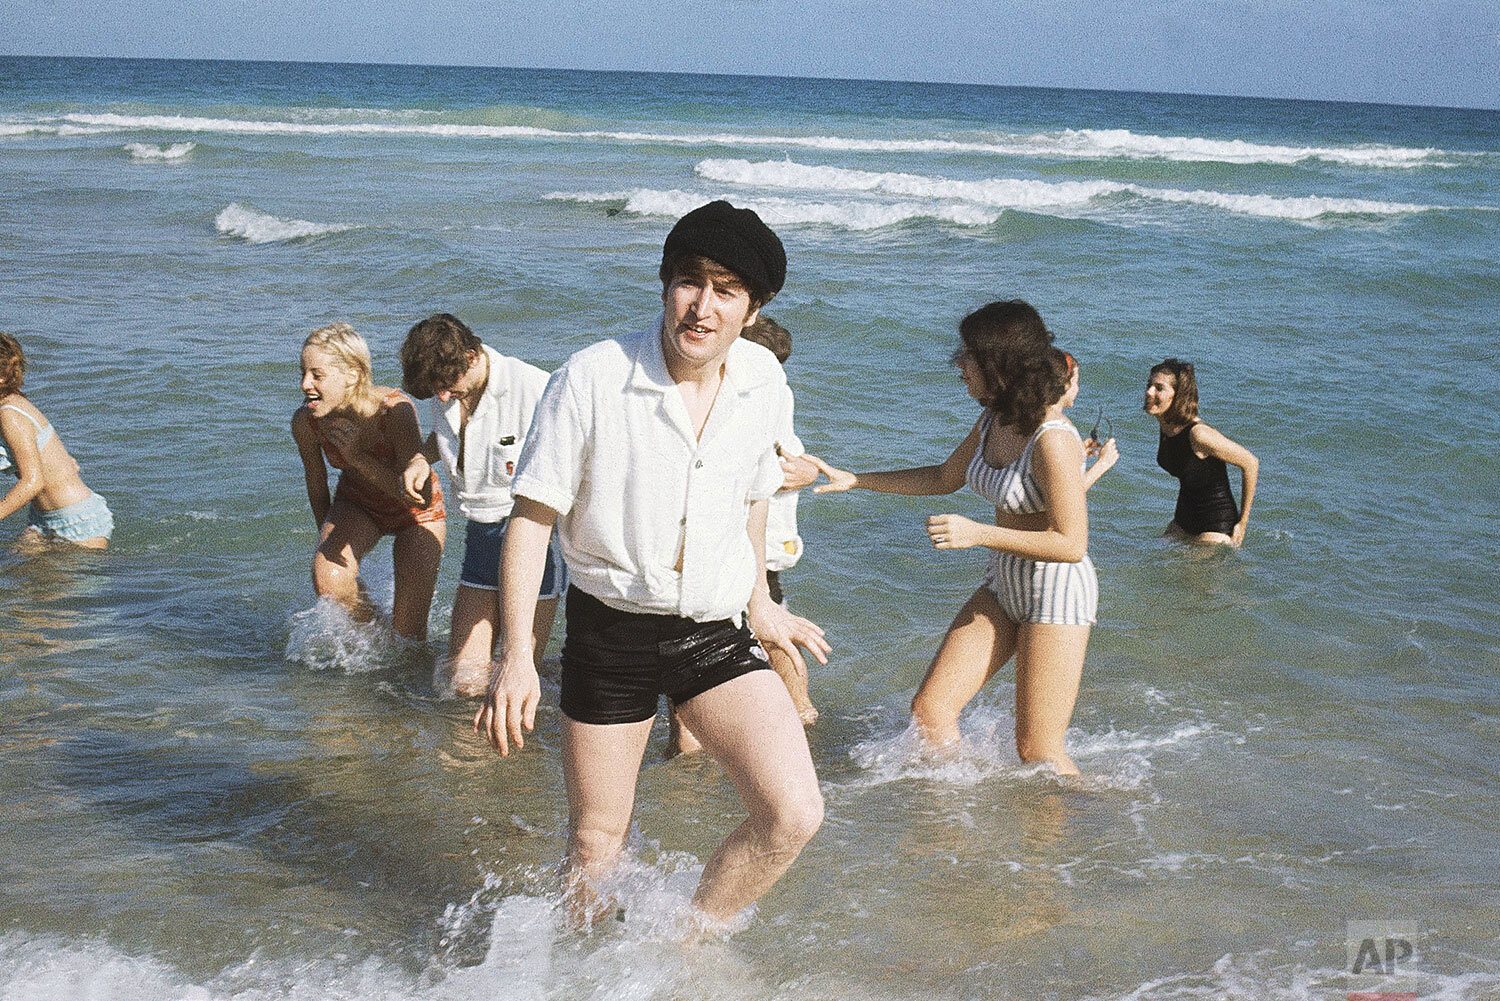  John Lennon of the Beatles emerges from the surf at Miami, Florida in February 1964. In background, left, is Ringo Starr with an unidentified woman. (AP Photo) 